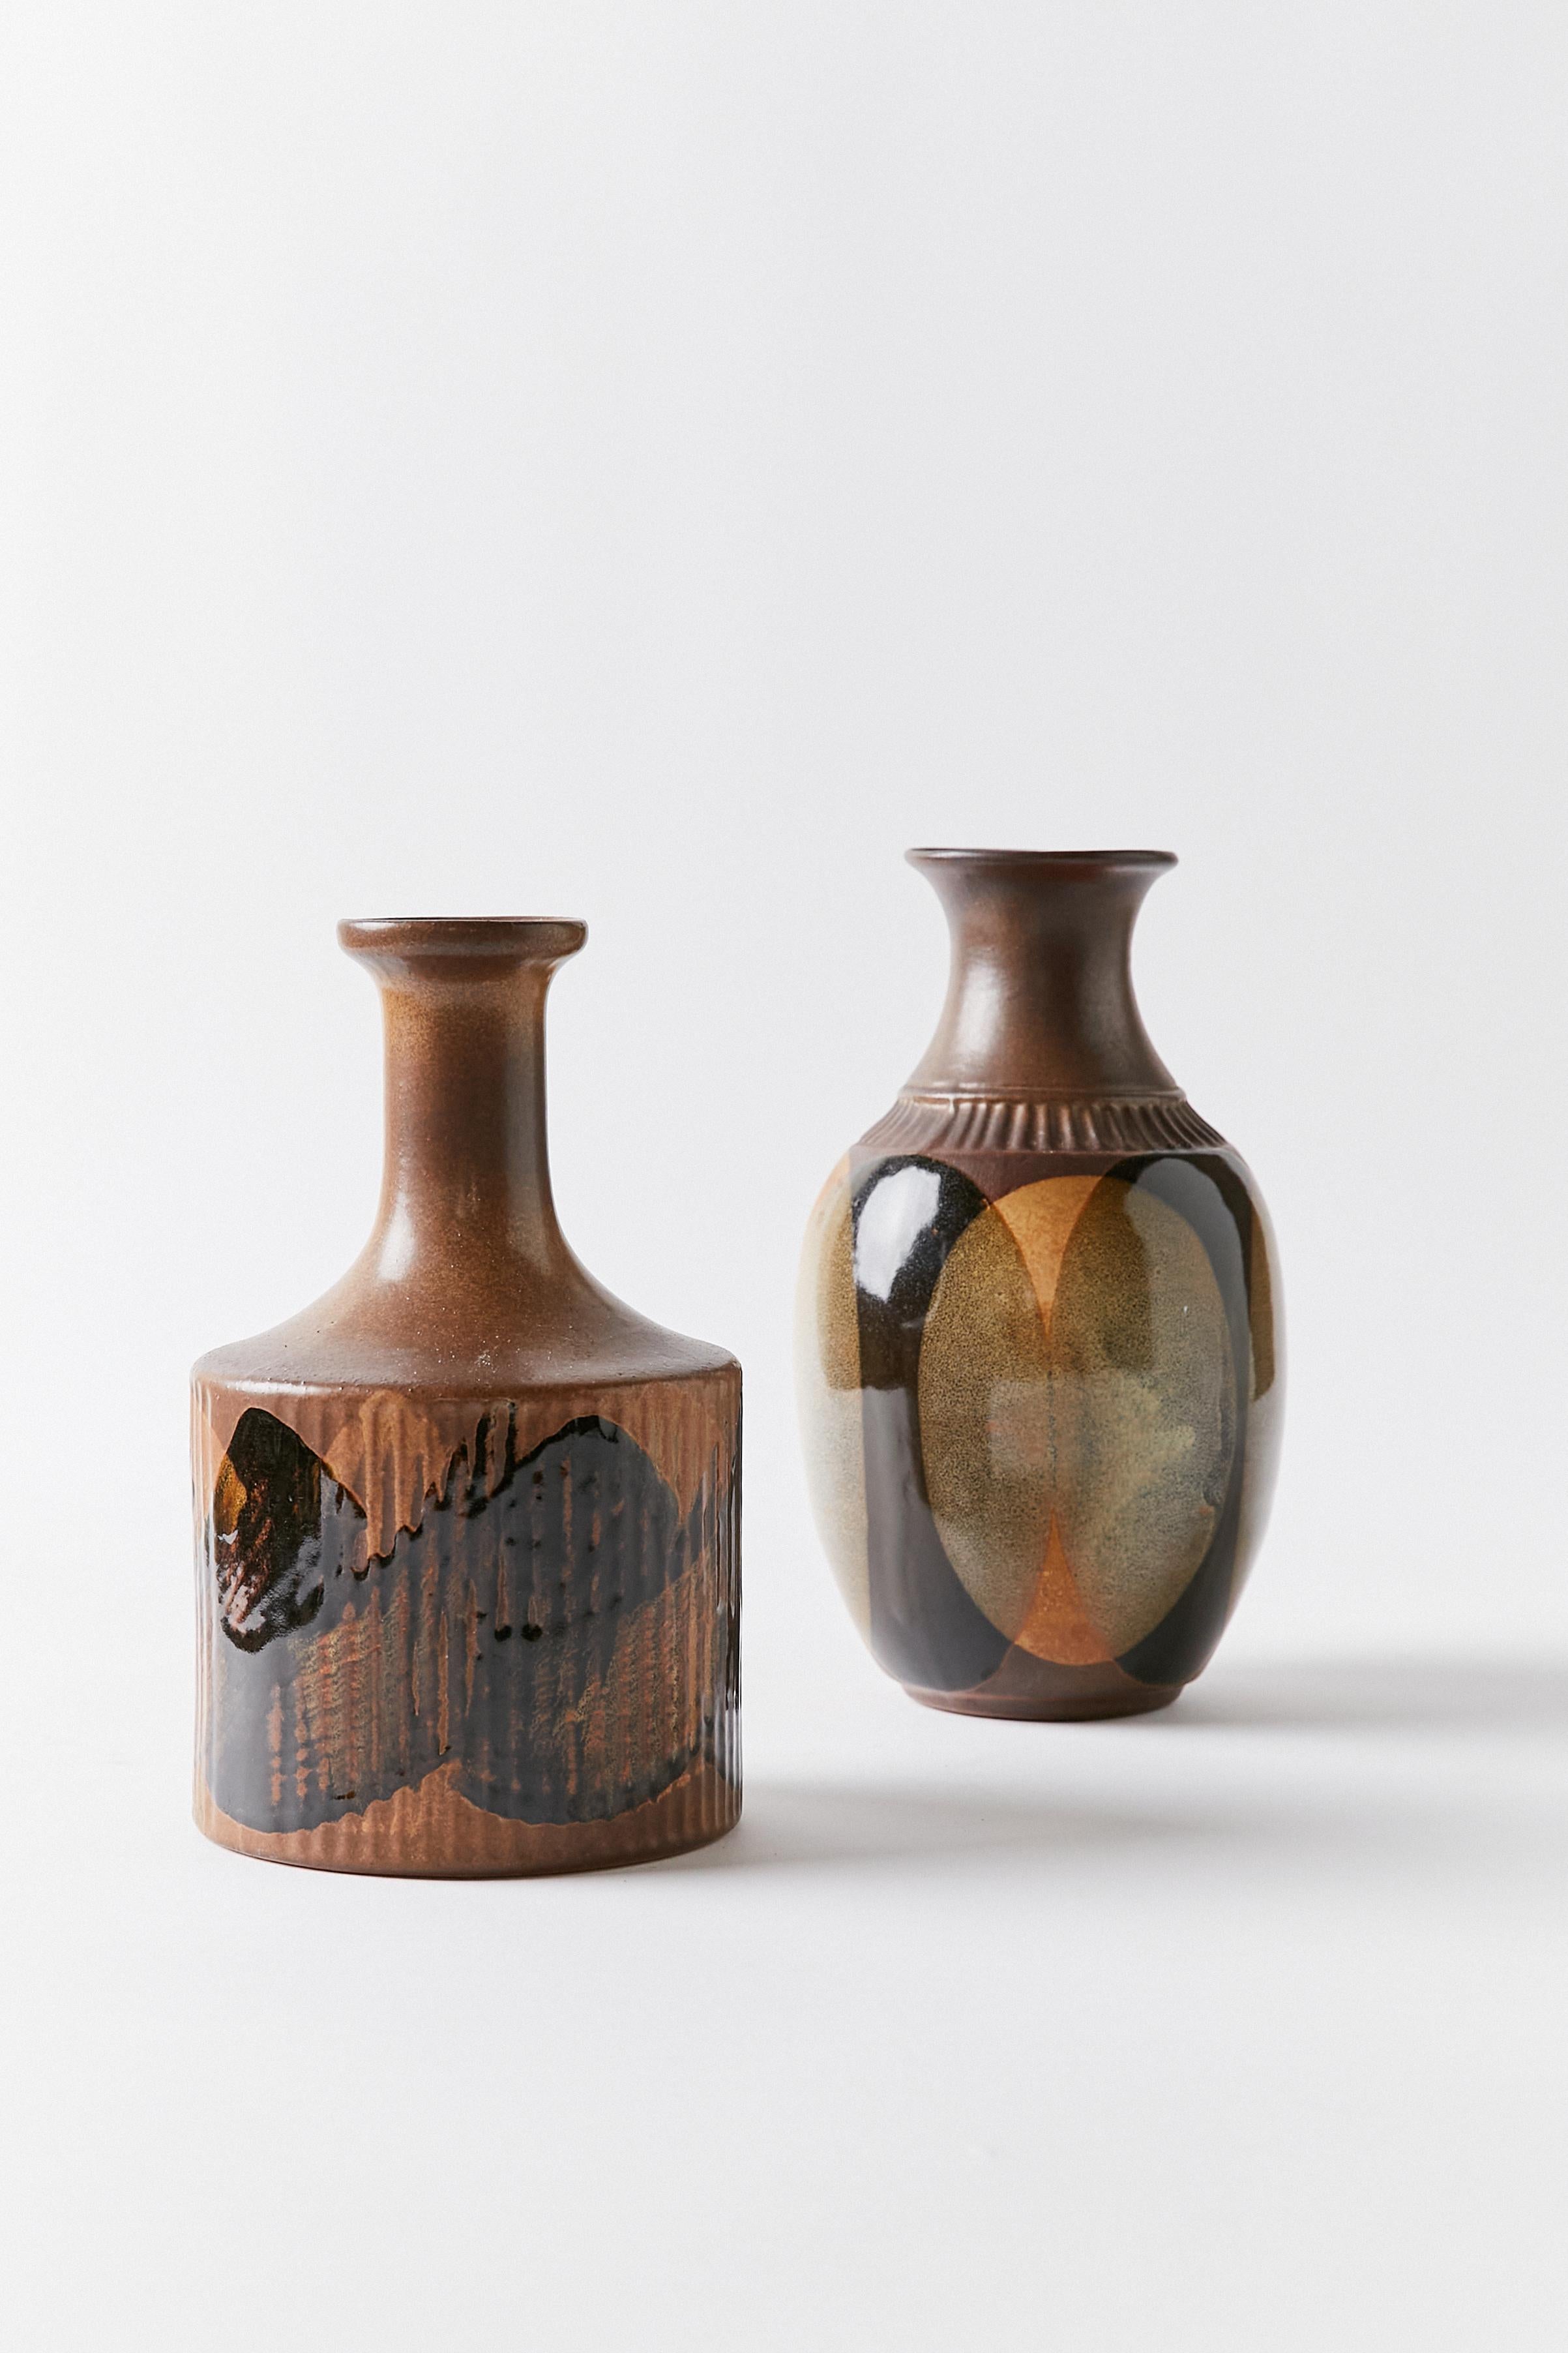 Set of two contemporary ceramic vases decorated in different shades of brown, black, dry green and ochre.

Vase 1
Height 10 in / 25.4 cm
Width 6 in / 15.24 cm
Depth 6 in / 15.24 cm
Vase 2.
Height 9.25 in / 23.50 cm
Width 5.5 in / 13.97